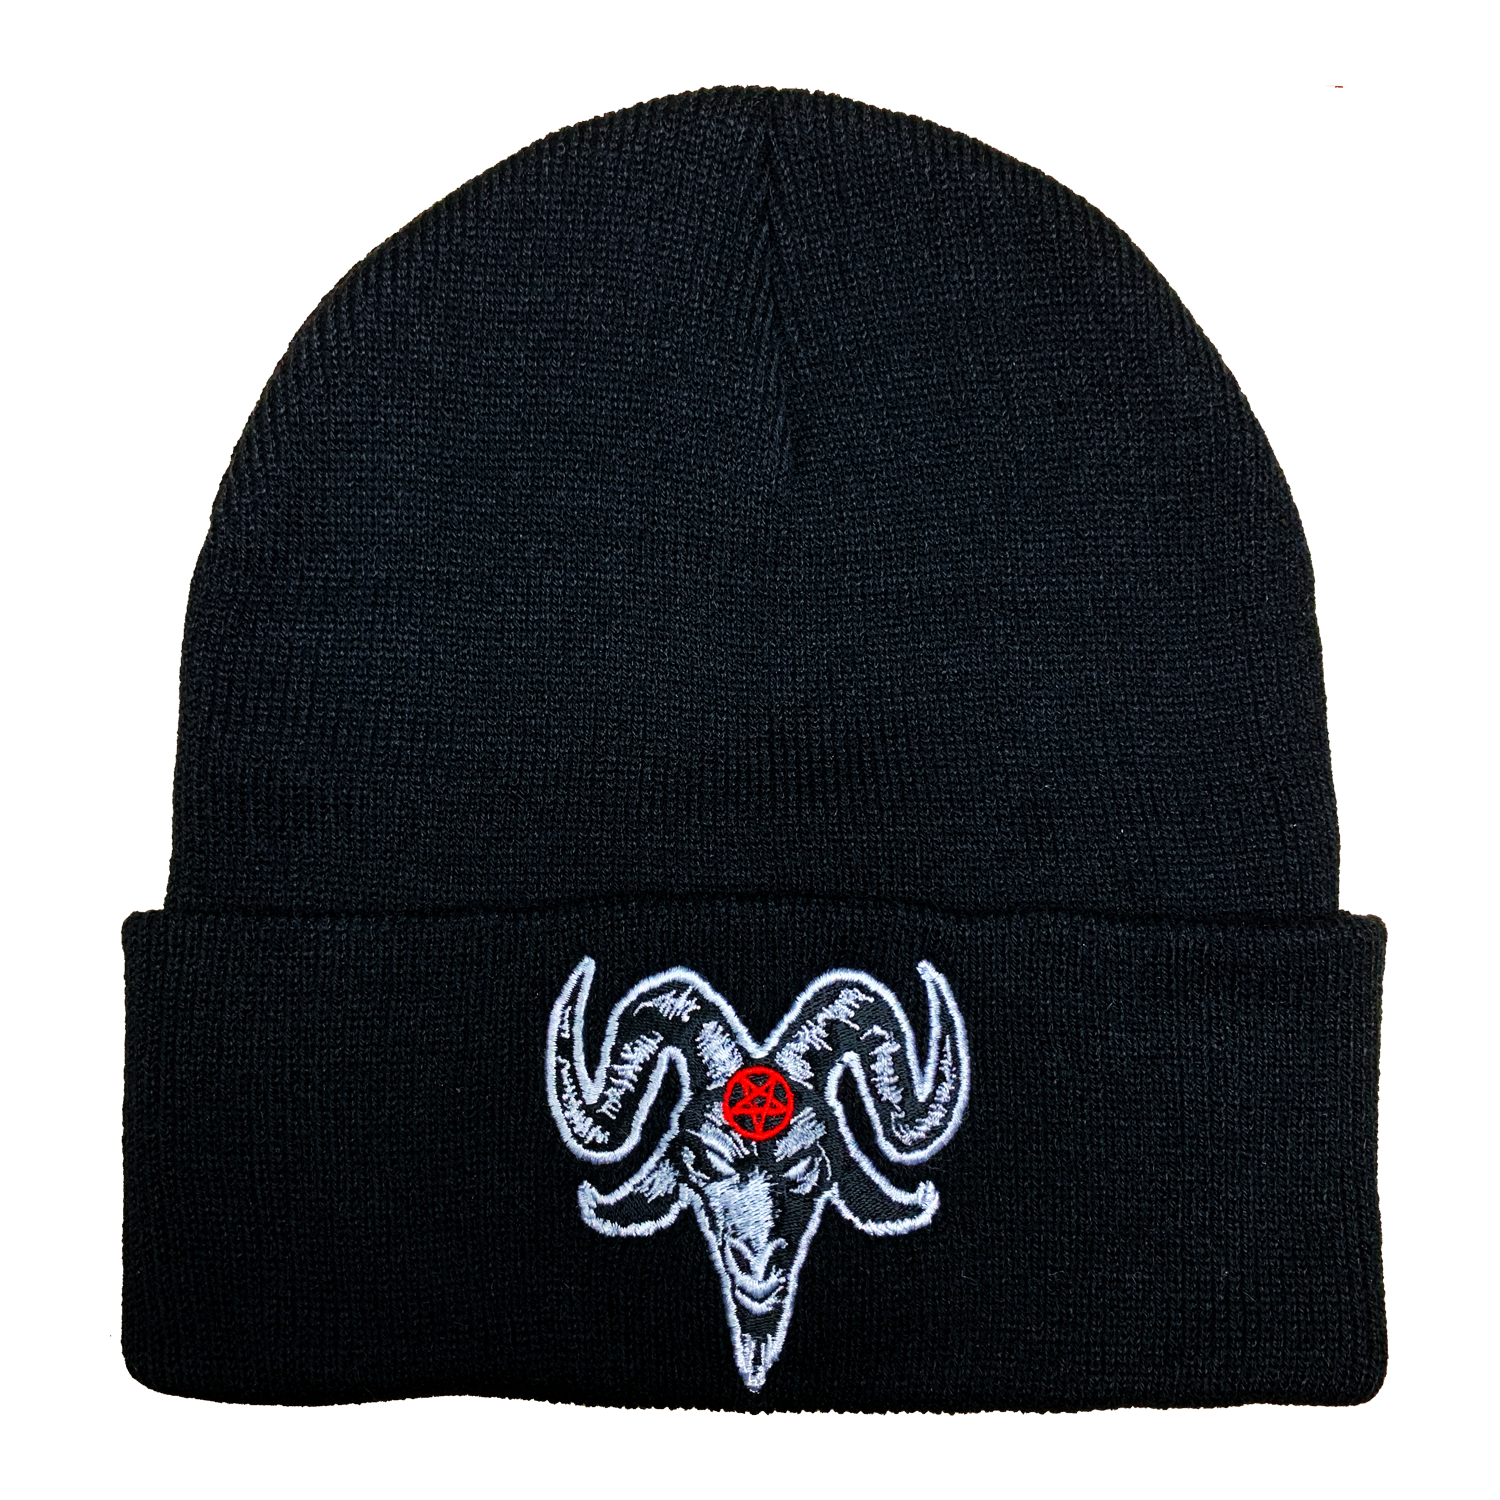 Baphomet Satanic Embroidered Beanie - UNMASKED Horror & Punk Patches and Decor